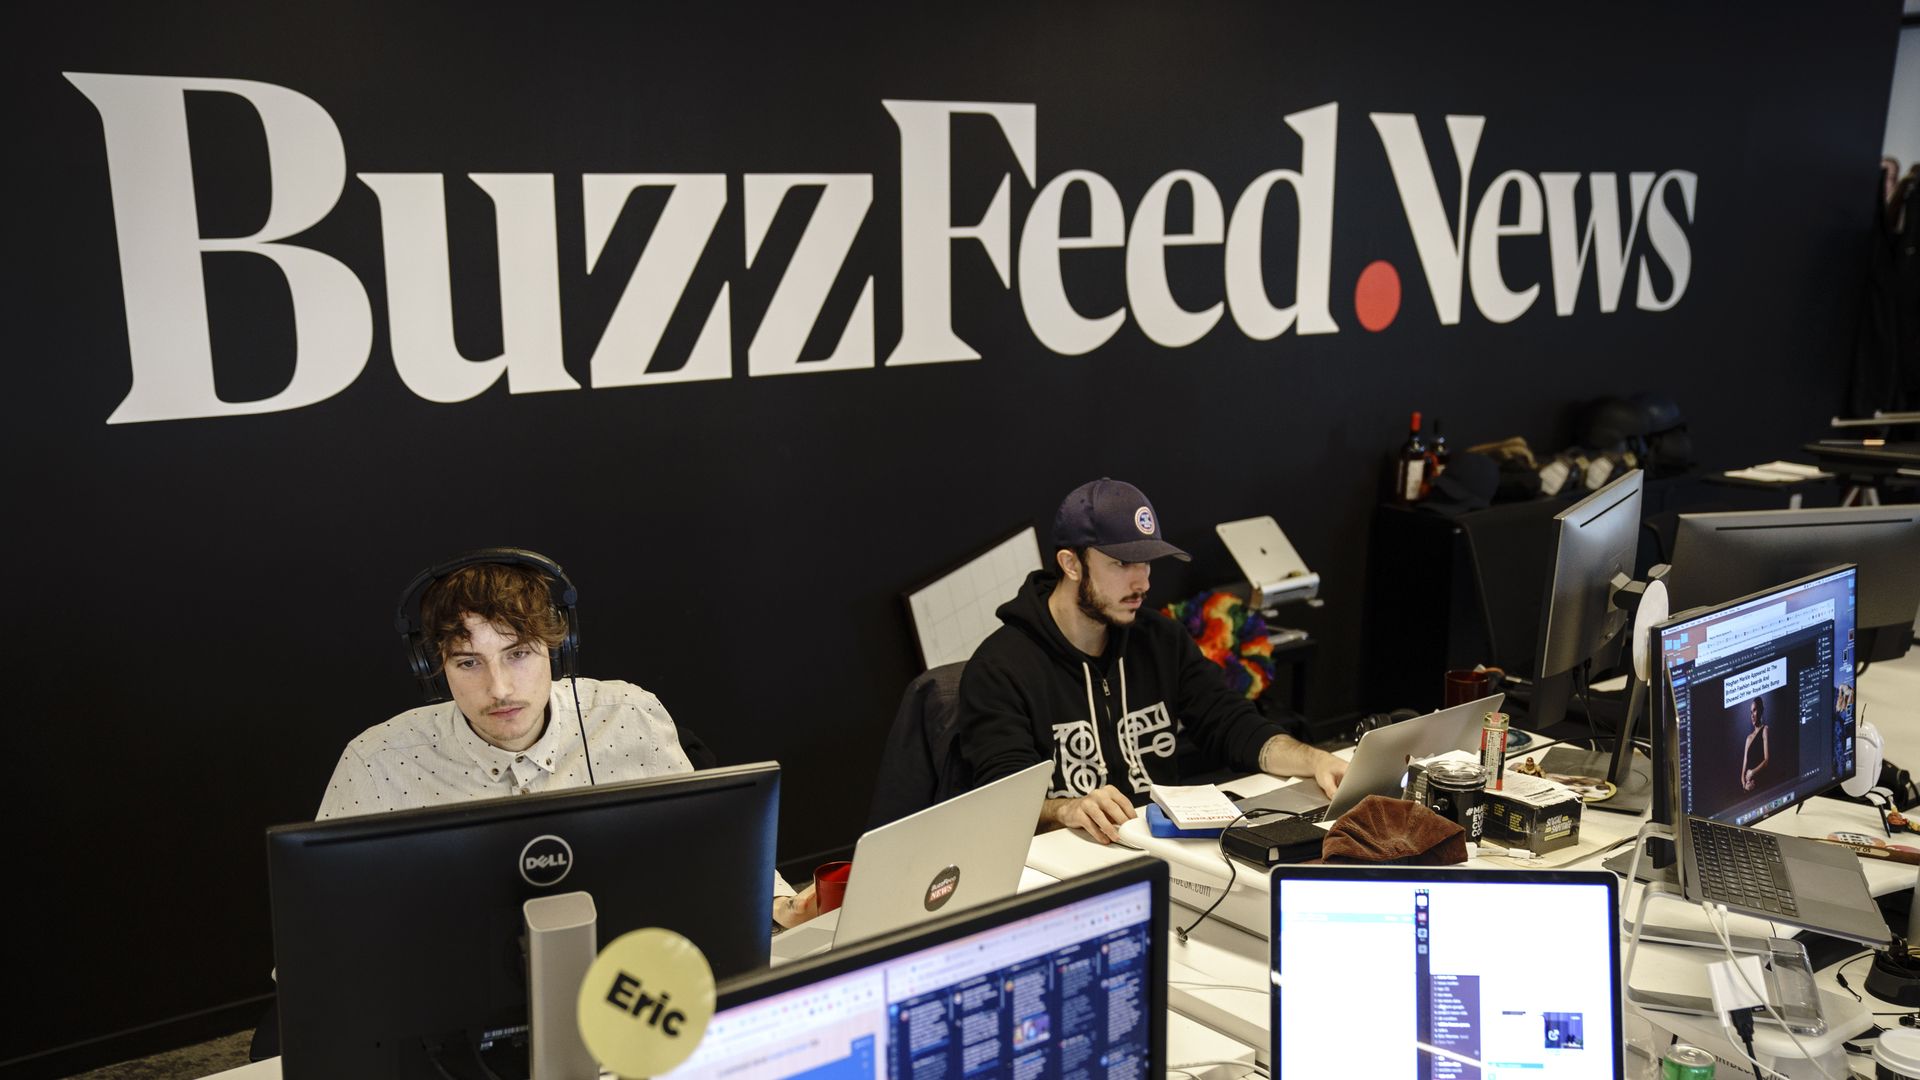 Employees working at BuzzFeed